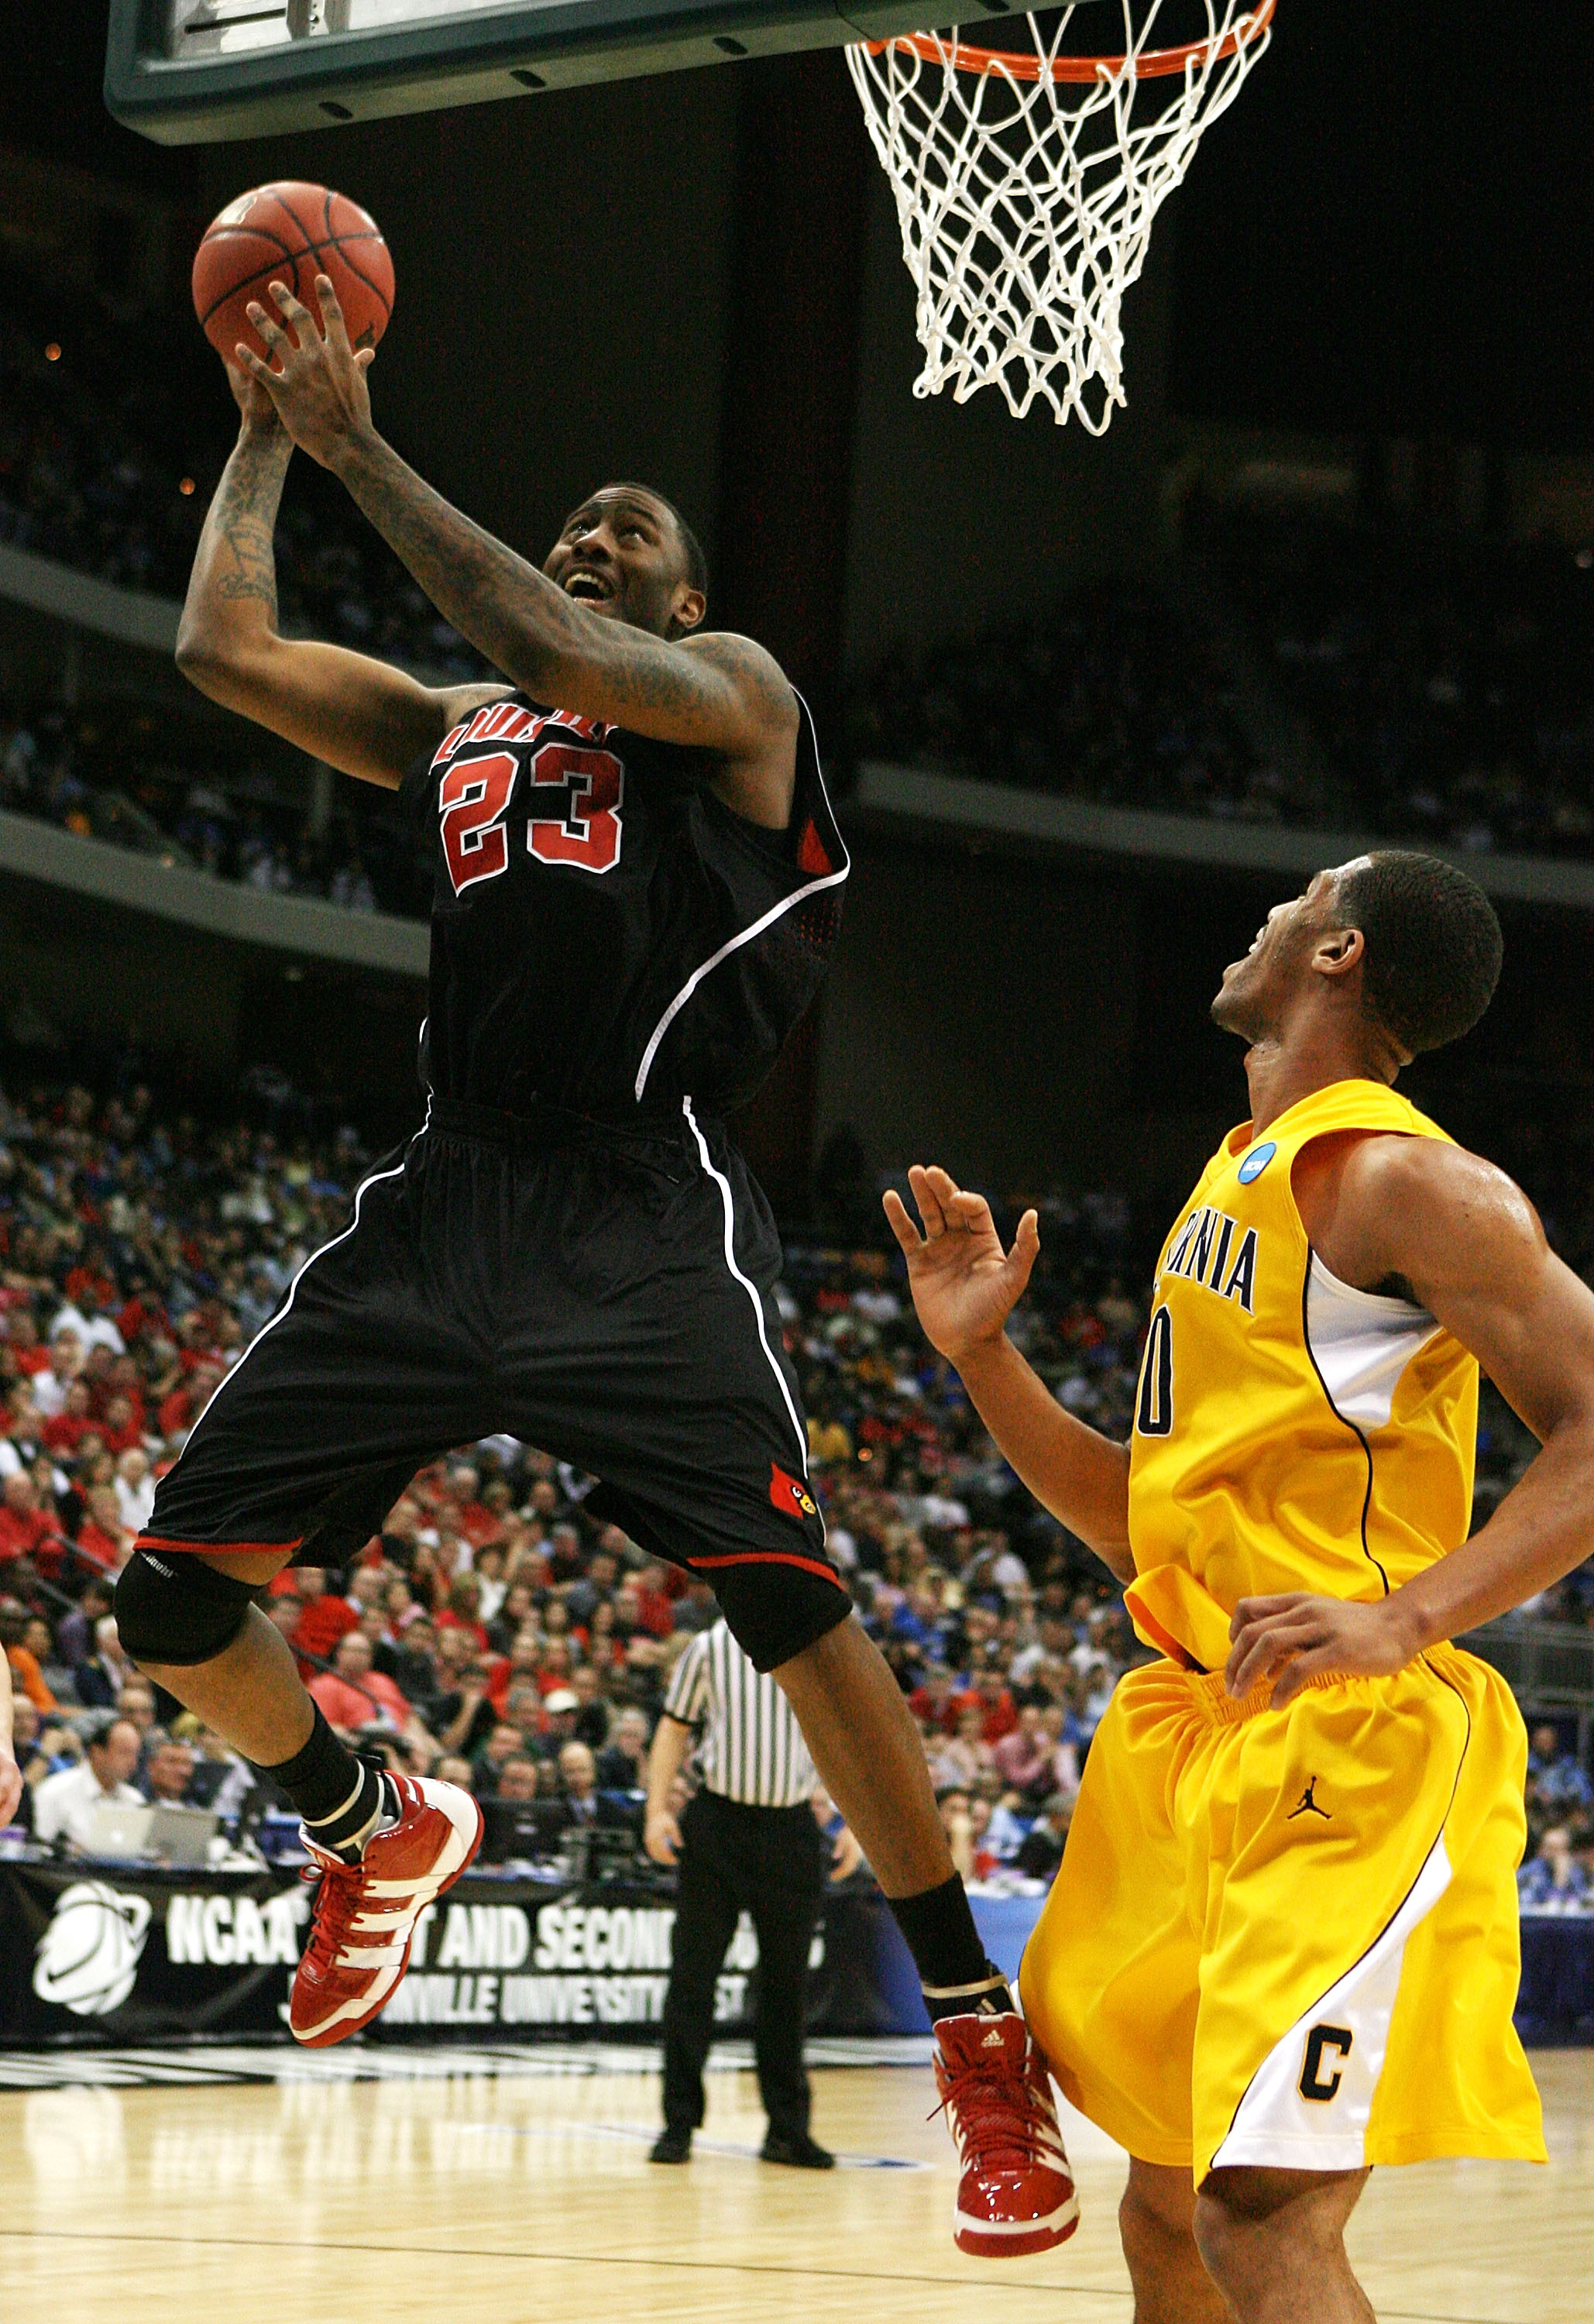 JACKSONVILLE, FL - MARCH 19:  Terrence Jennings #23 of the Louisville Cardinals scores over Jamal Boykin #10 of the California Golden Bears during the first round of the 2010 NCAA men's basketball tournament at Jacksonville Veteran's Memorial Arena on Mar